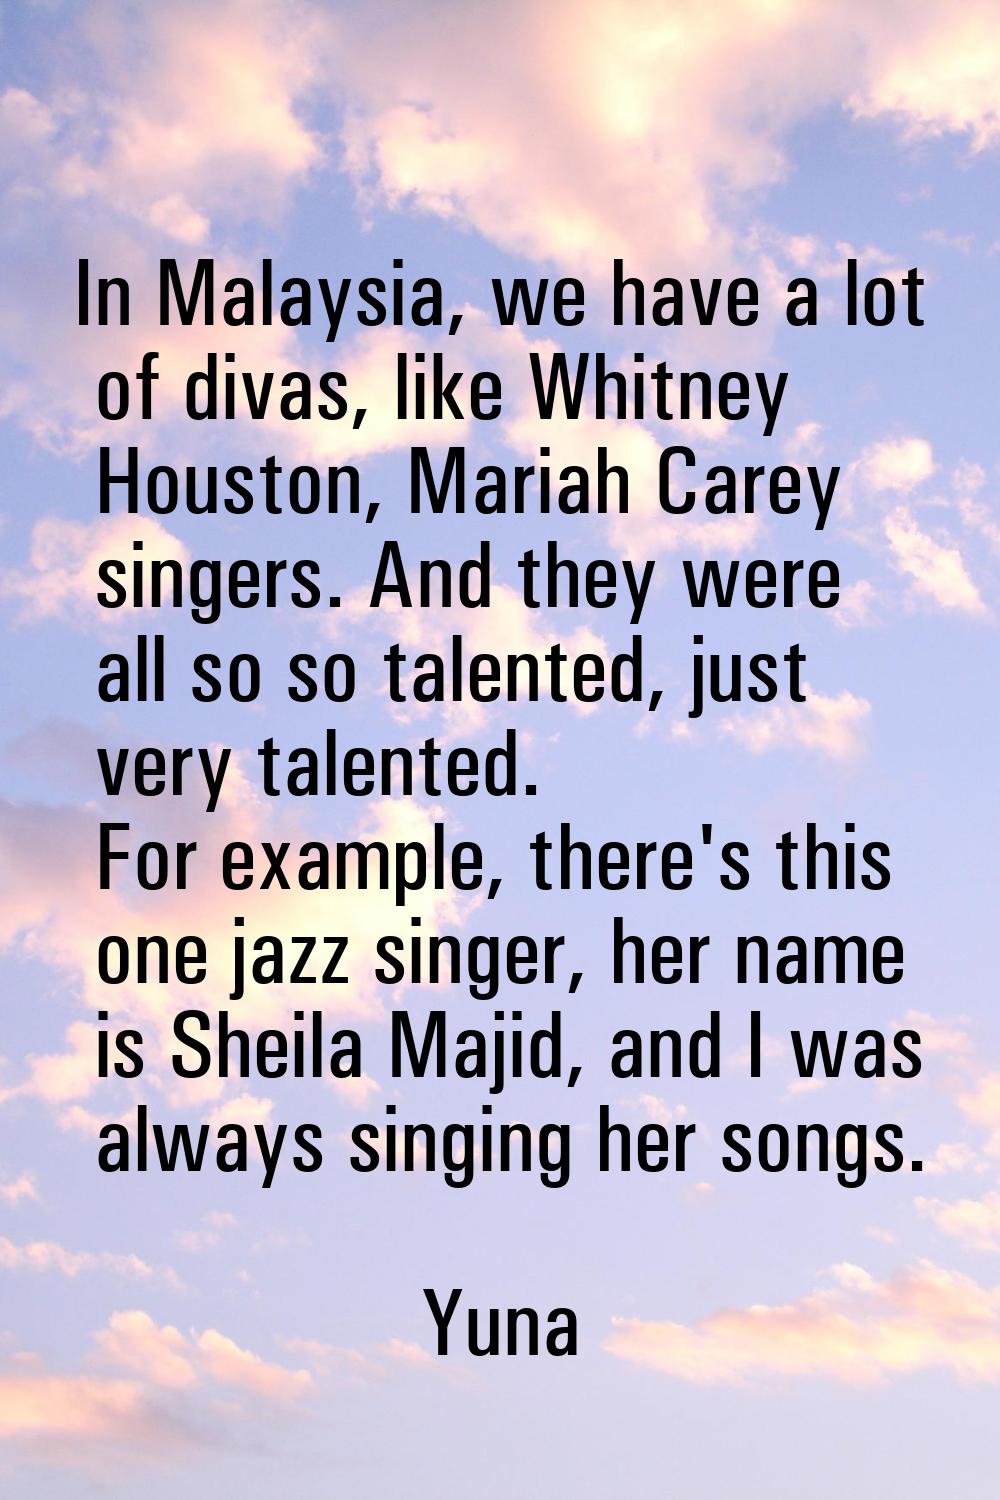 In Malaysia, we have a lot of divas, like Whitney Houston, Mariah Carey singers. And they were all 